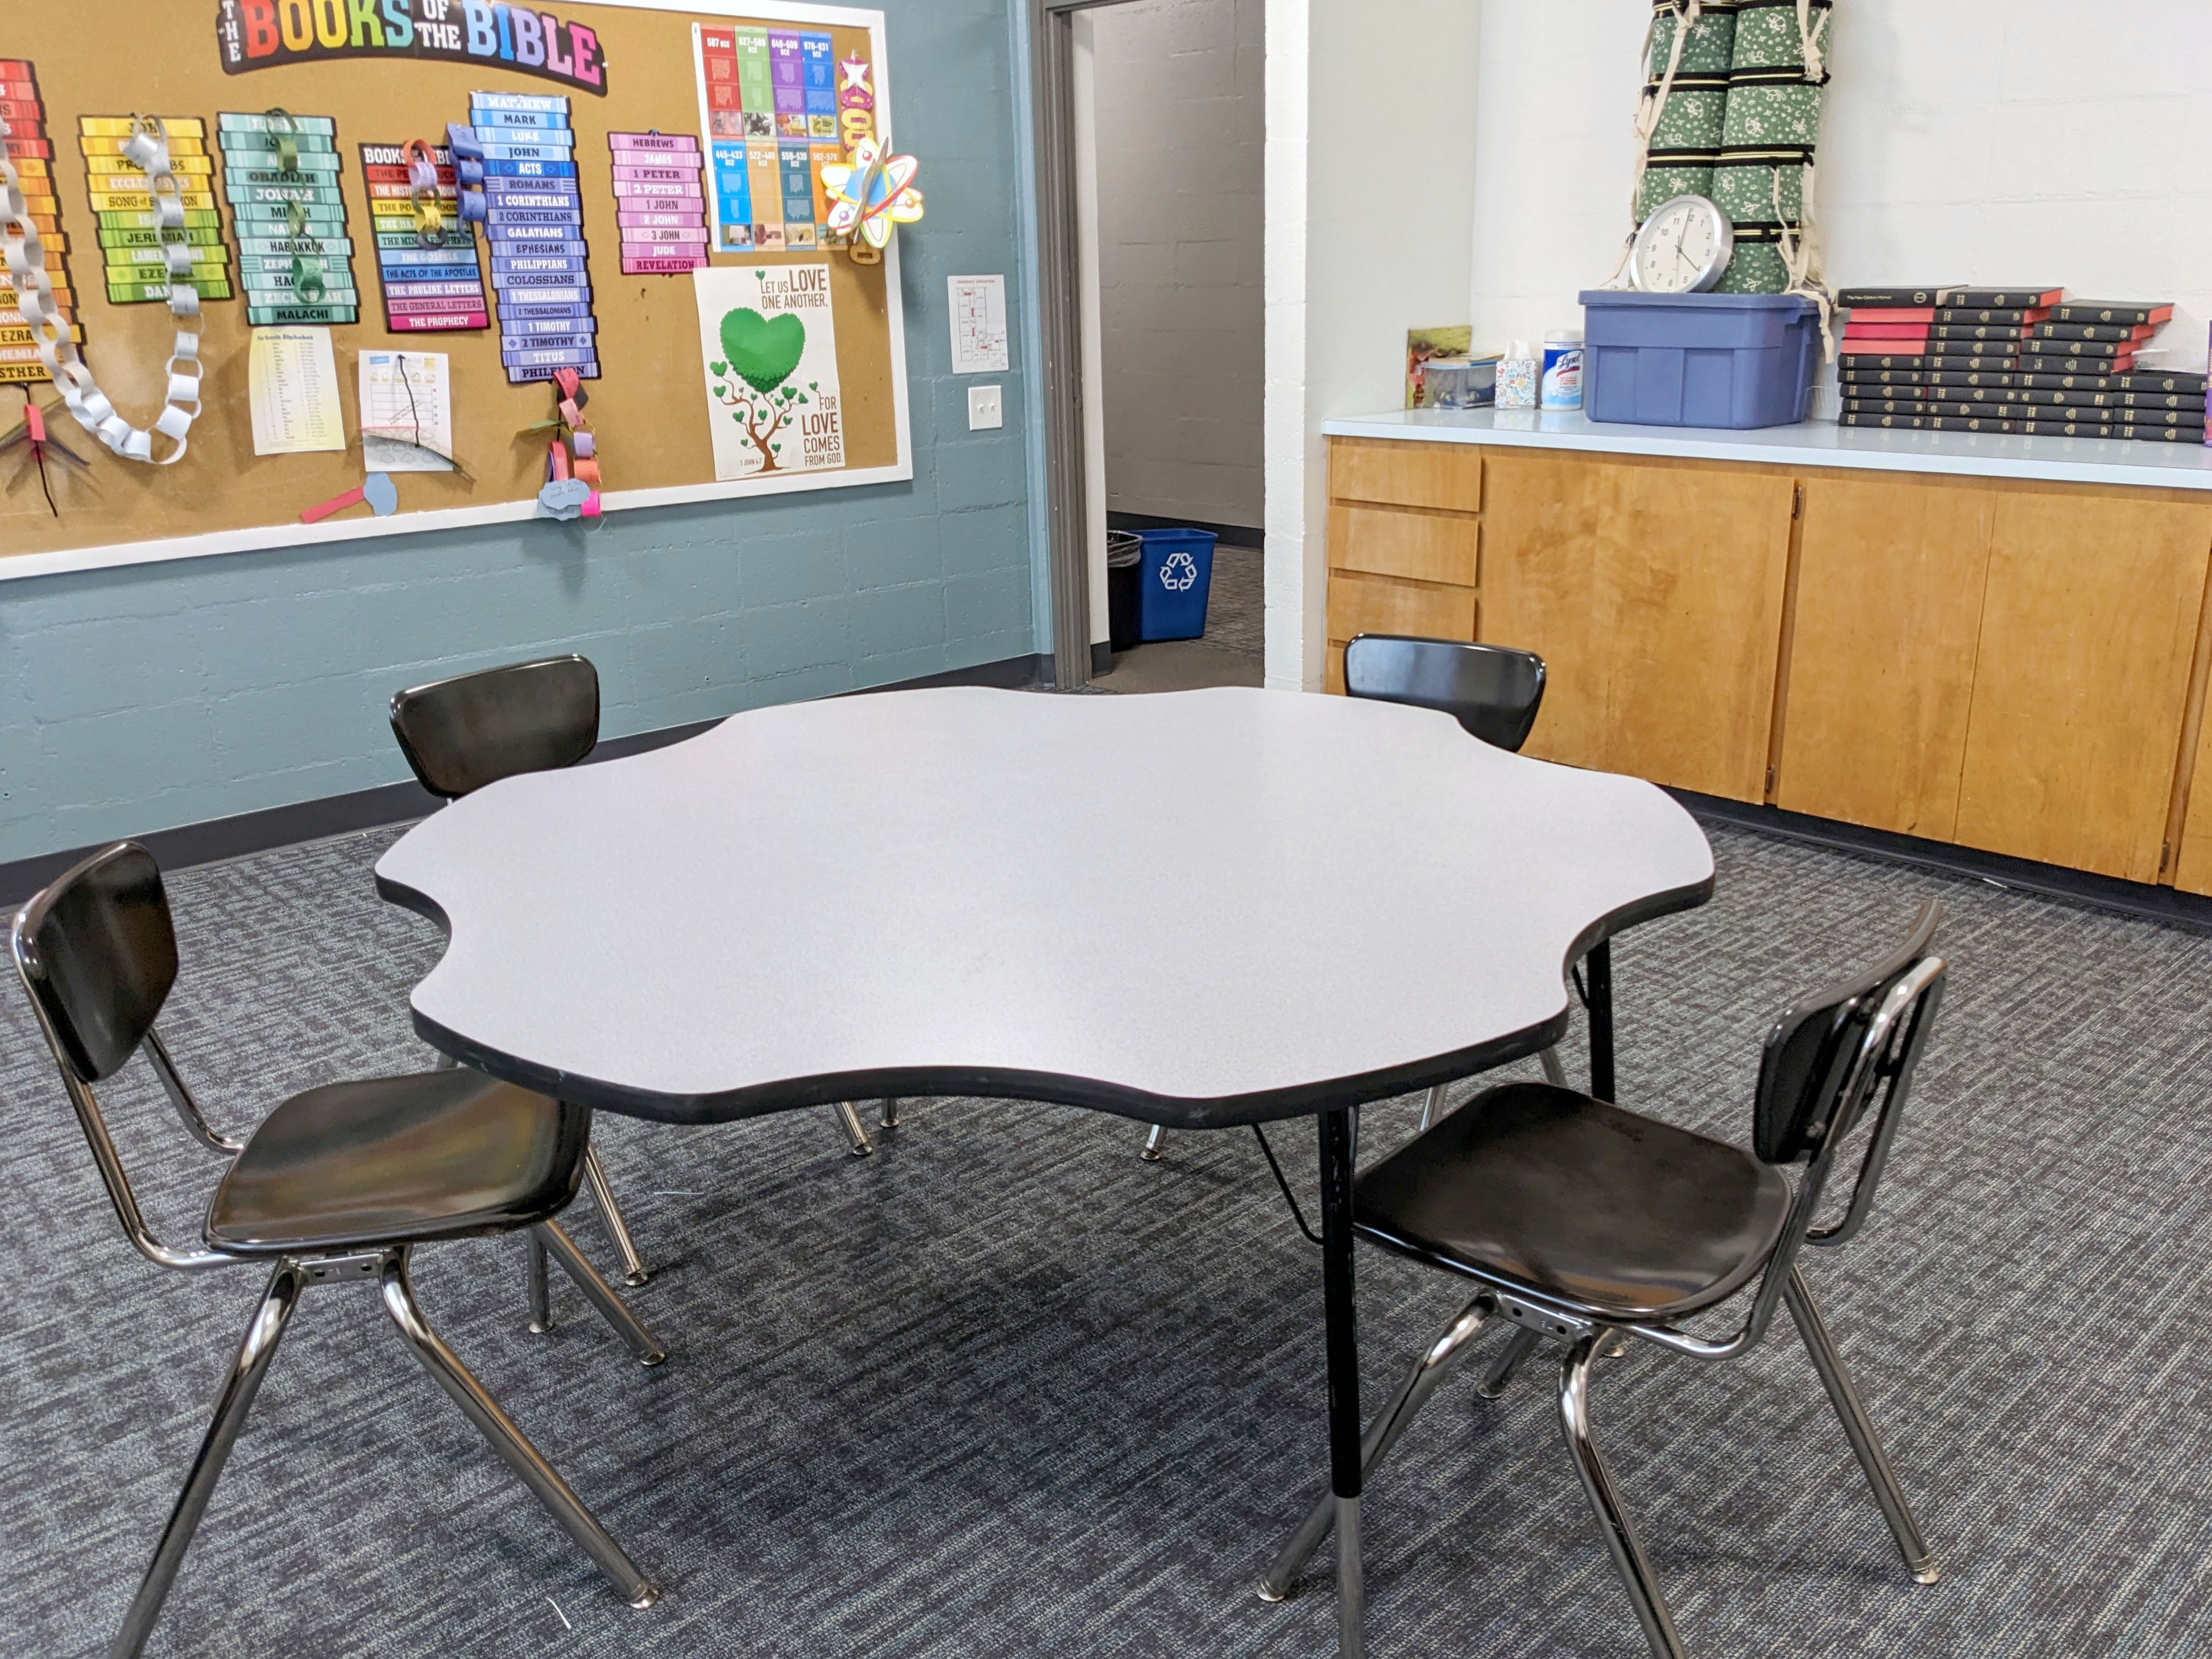 Classroom 2 with table and chairs